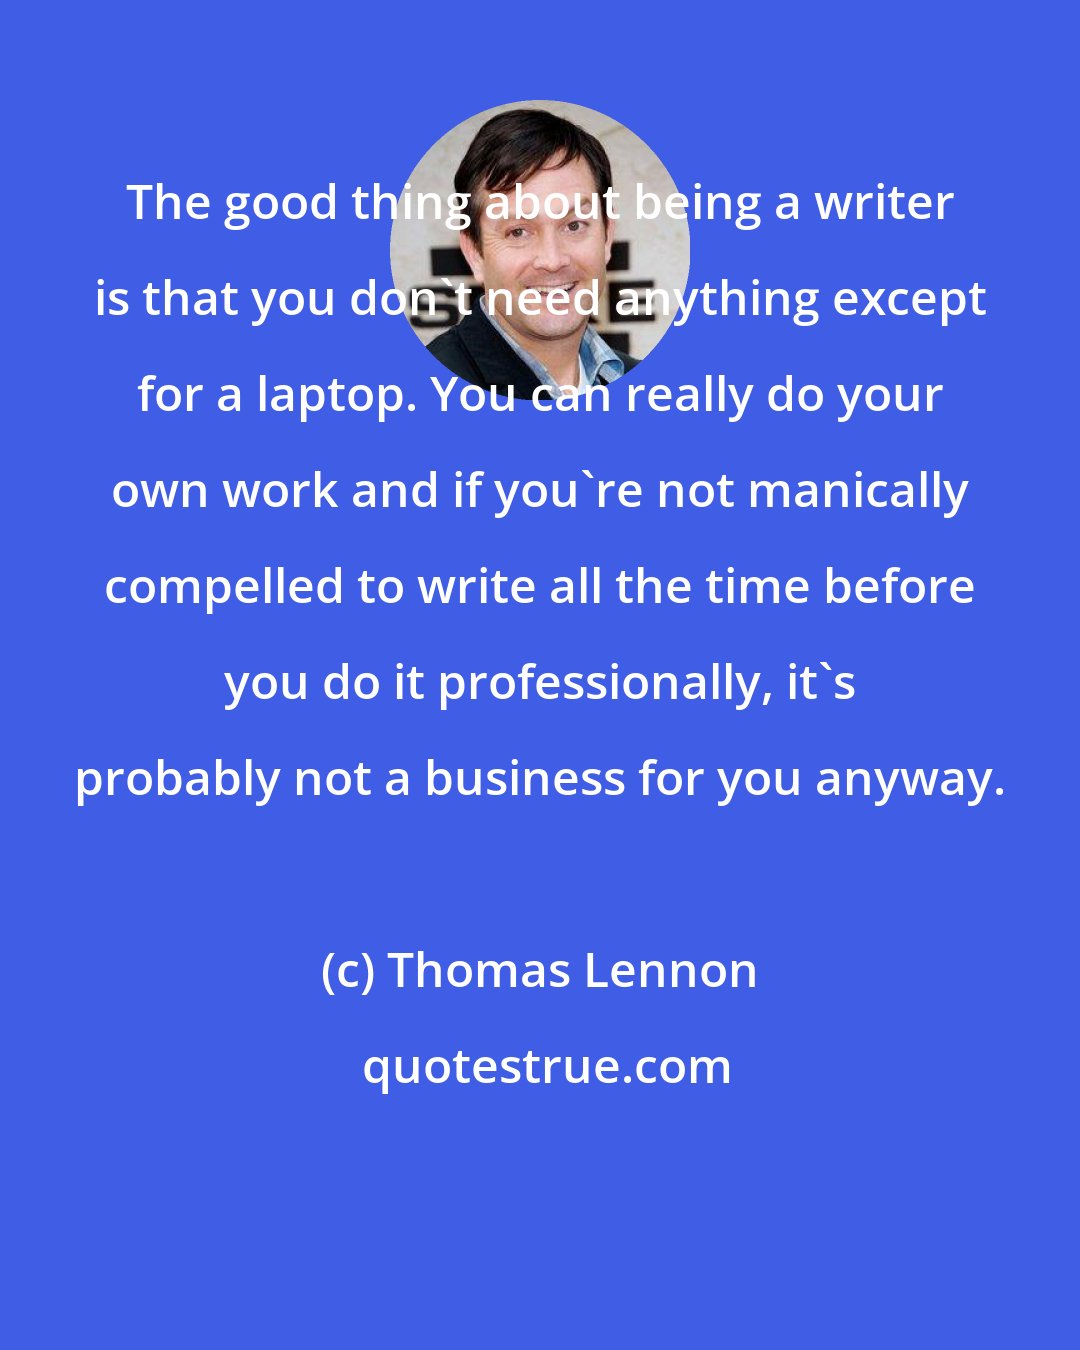 Thomas Lennon: The good thing about being a writer is that you don't need anything except for a laptop. You can really do your own work and if you're not manically compelled to write all the time before you do it professionally, it's probably not a business for you anyway.